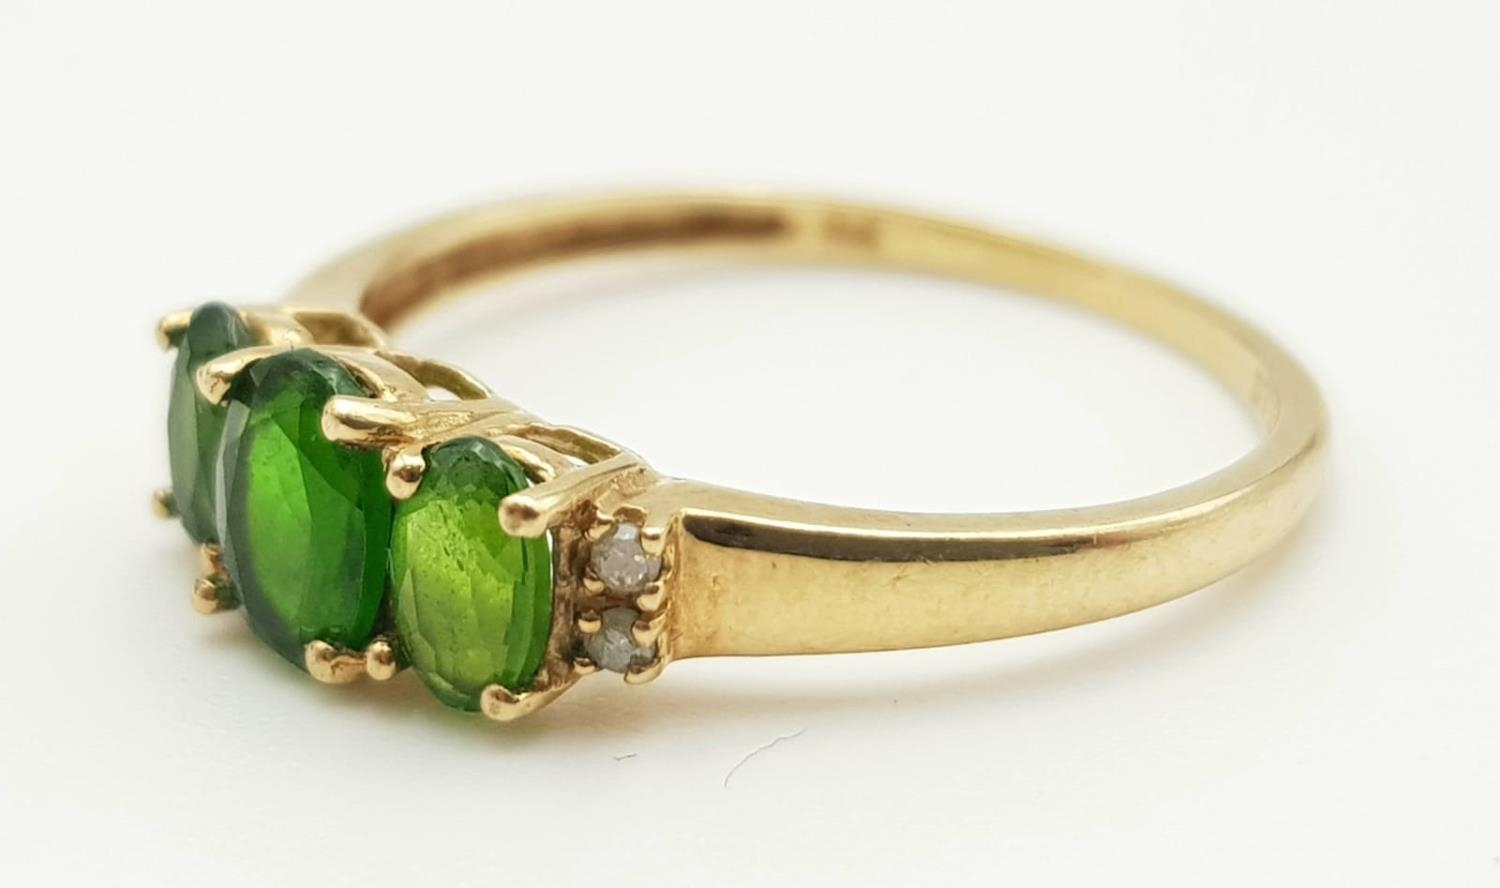 A 9K GOLD RING WITH GREEN TITANITE TRILOGY FLANKED BY 2 SMALL DIAMONDS ON EACH SIDE. 1.45gms size P - Image 2 of 6